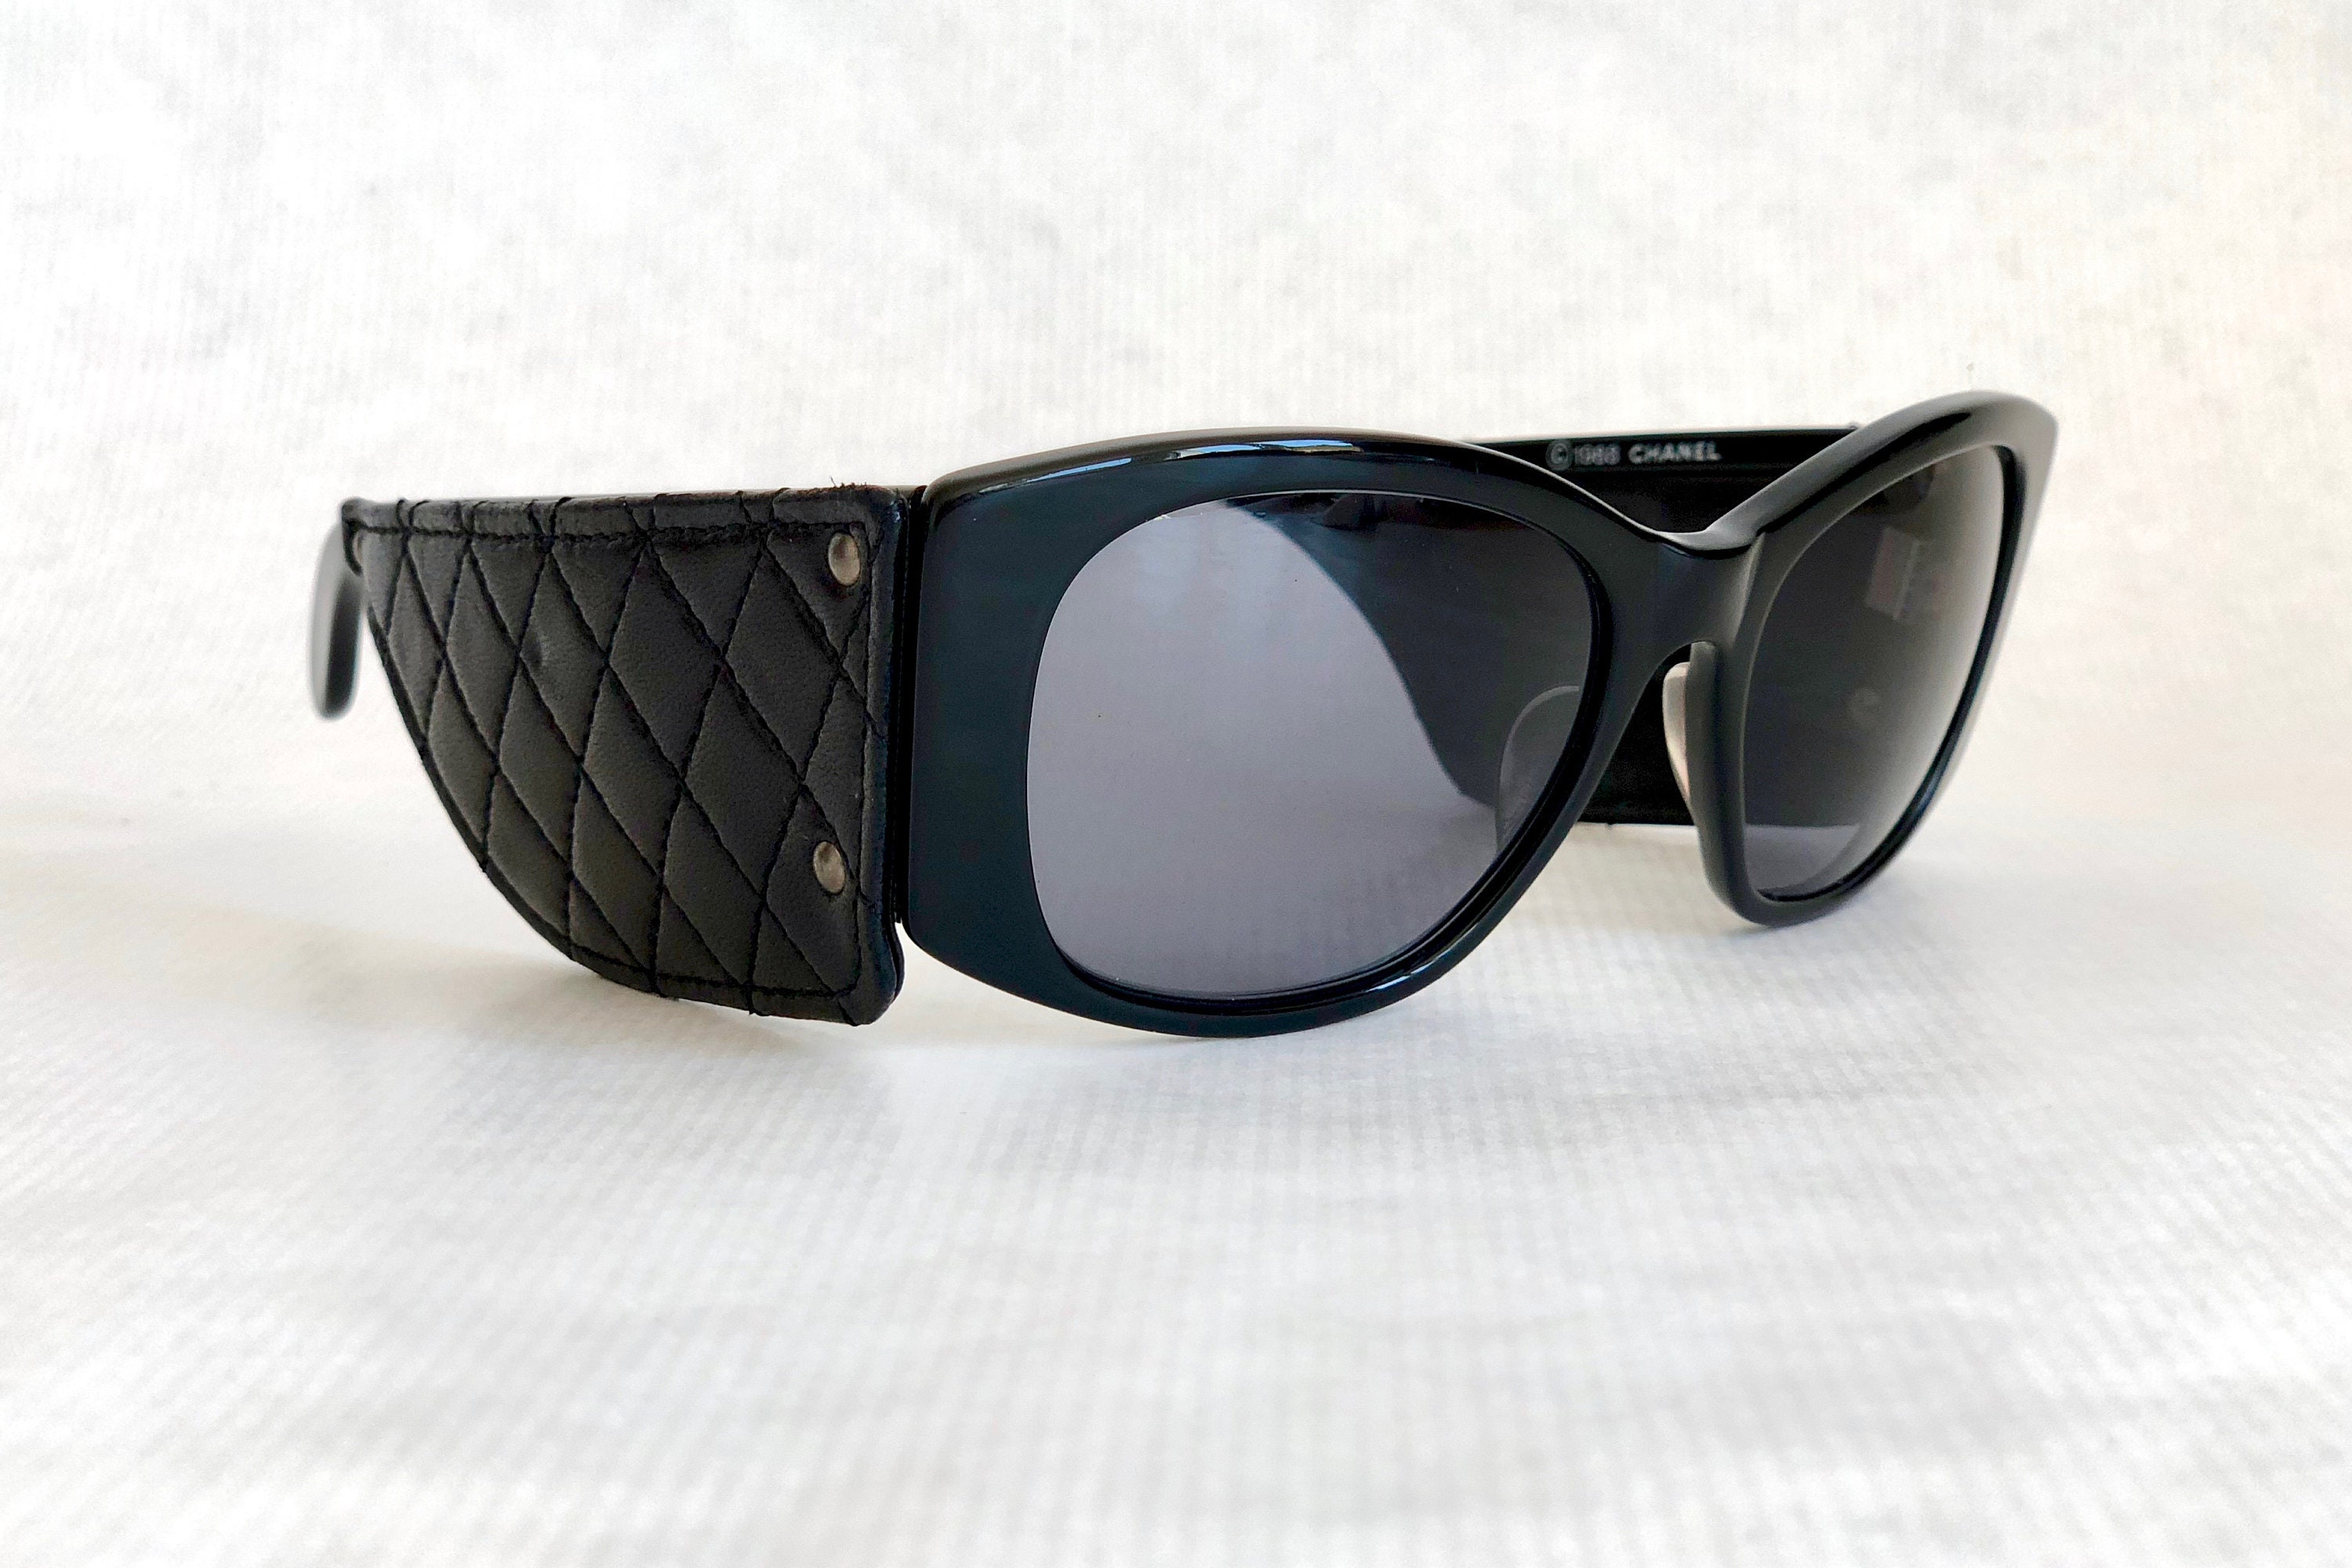 Vintage 1988 CHANEL Quilted Leather Sunglasses 